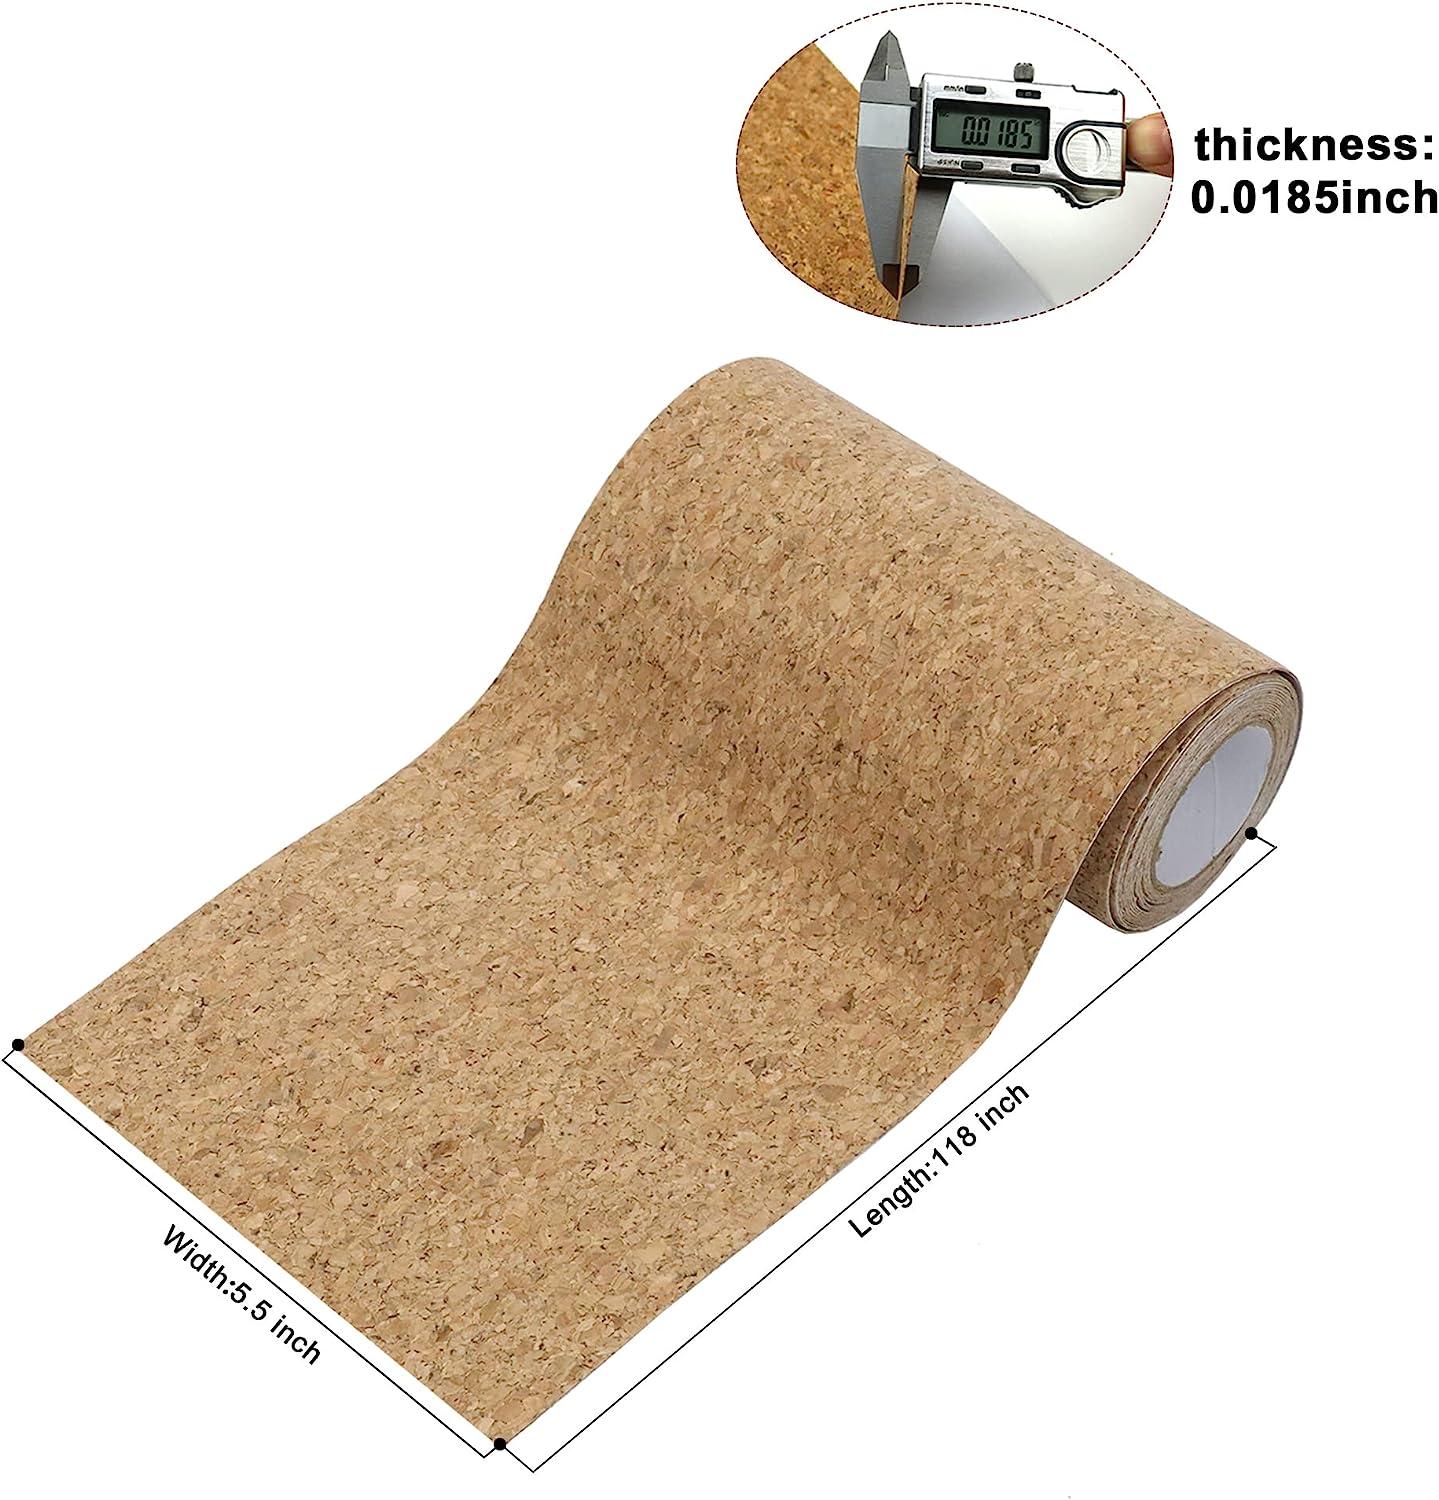 Kosiz 4 Pack Self Adhesive Cork Board Roll 12 Inch x 78 in/ 6.5 ft Cork  Drawer Shelf Liner Adhesive Backed Cork Roll Sticky Cork Sheet for School